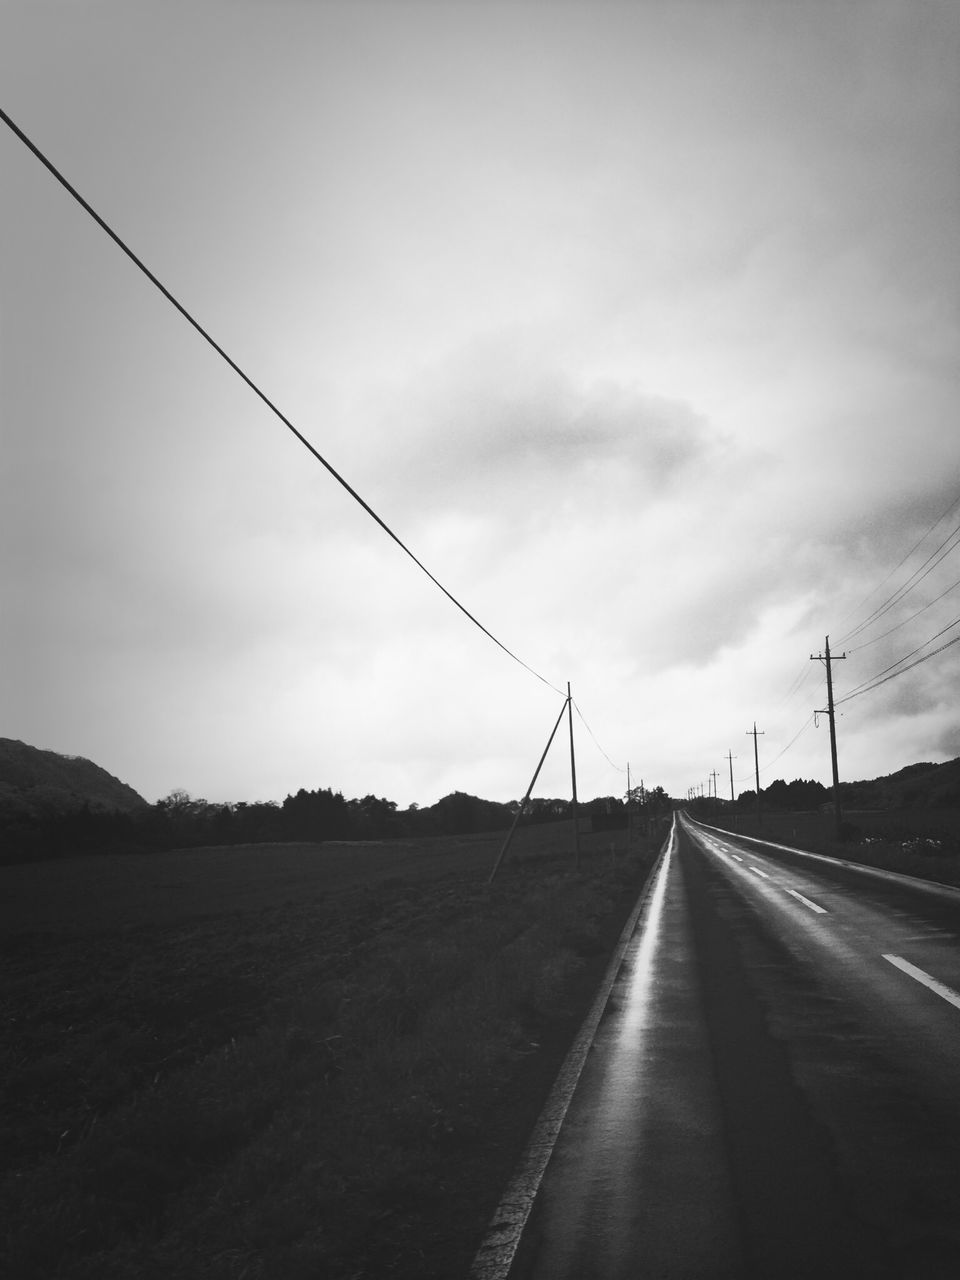 the way forward, sky, transportation, electricity pylon, diminishing perspective, road, connection, vanishing point, power line, power supply, electricity, fuel and power generation, cloud - sky, cloudy, road marking, cable, outdoors, cloud, overcast, long